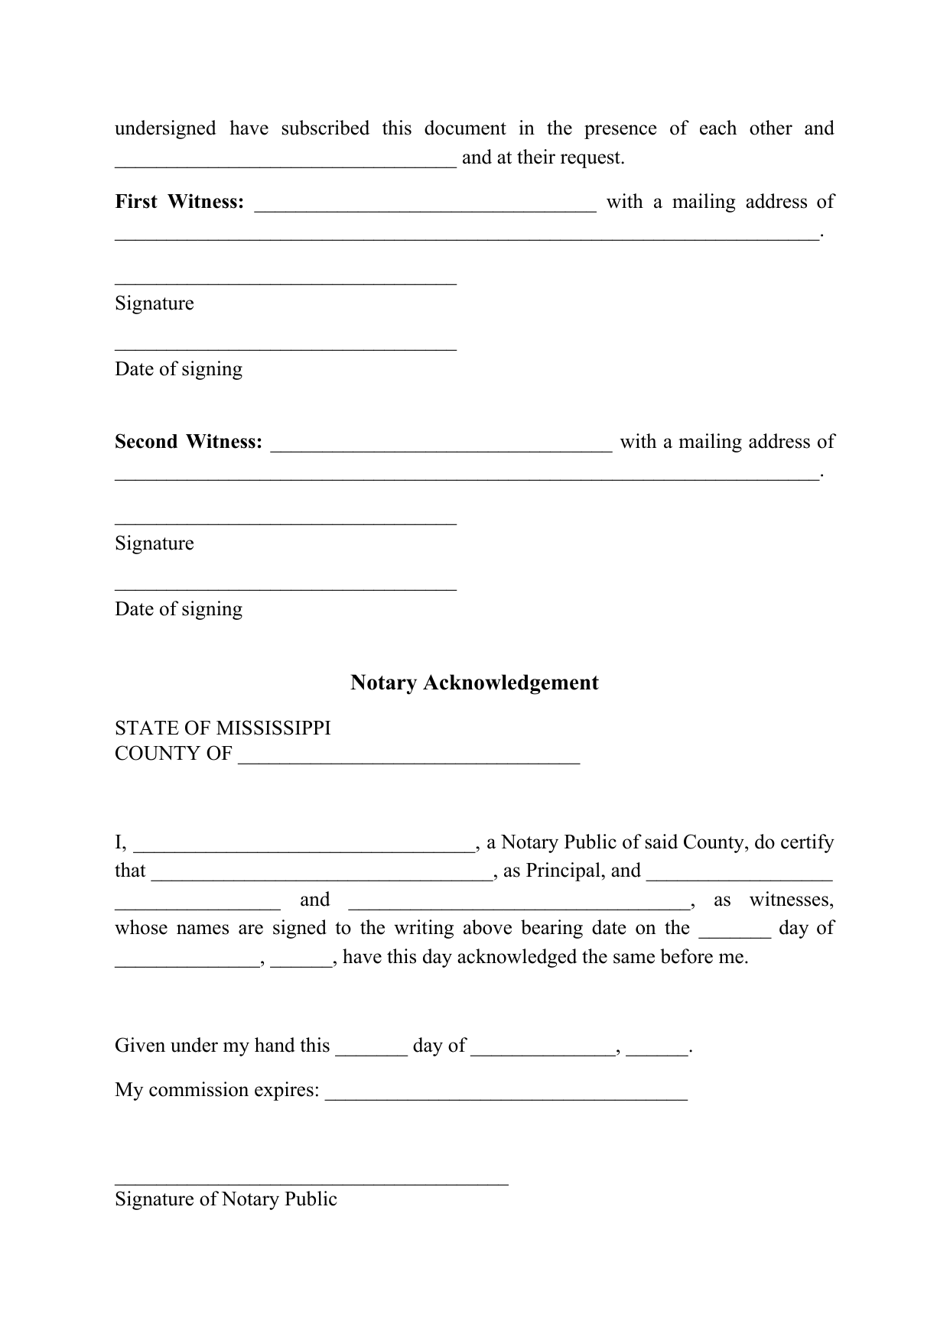 mississippi-living-will-form-fill-out-sign-online-and-download-pdf